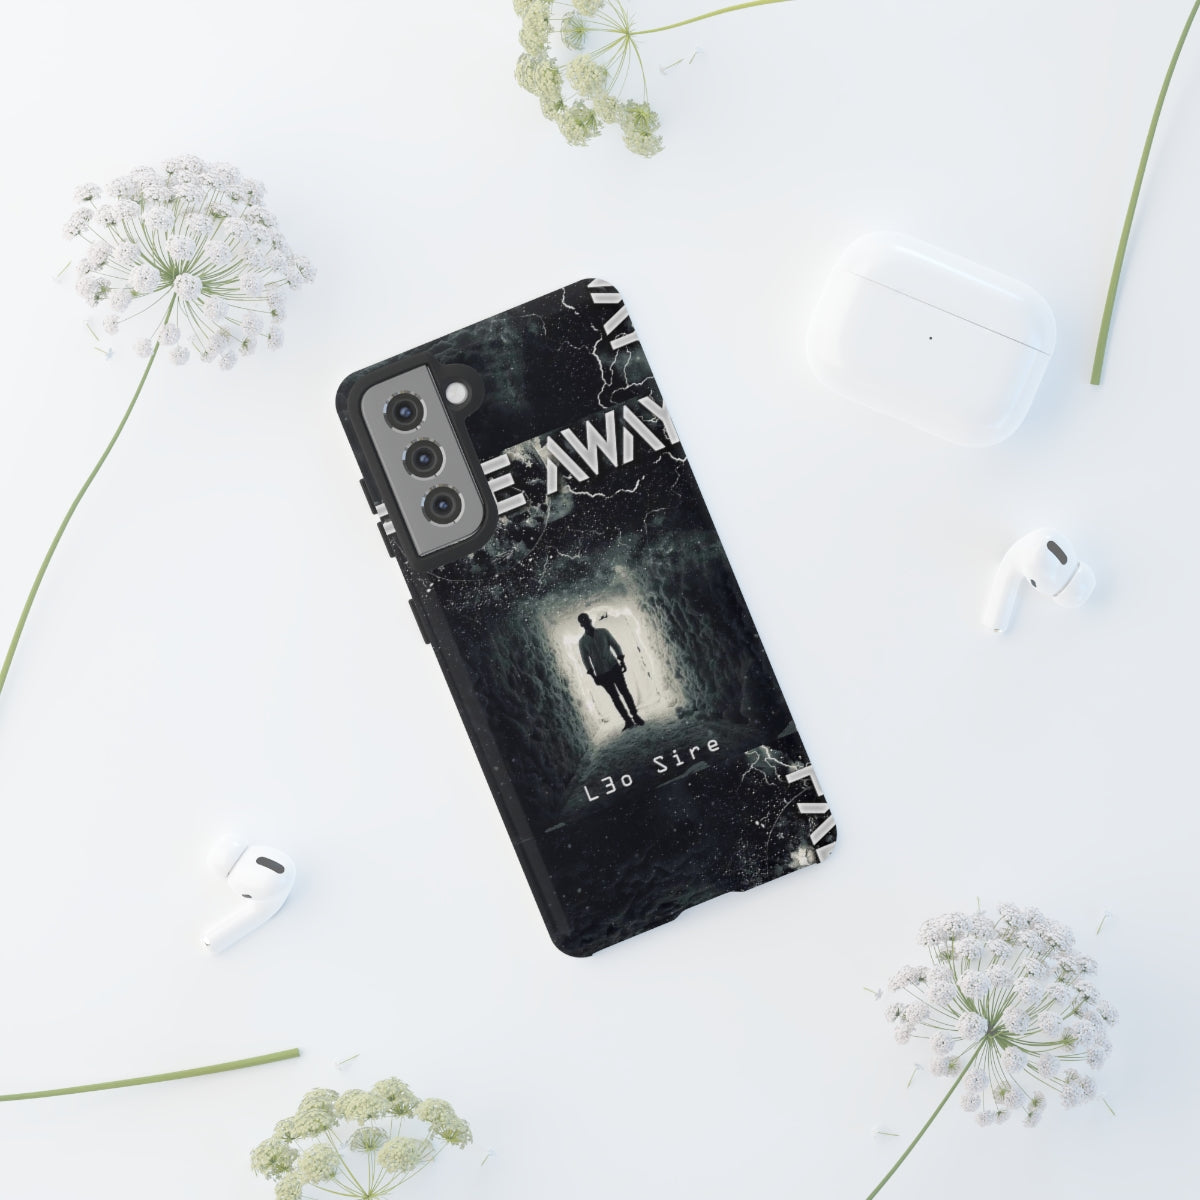 Fade Away Phone Cases